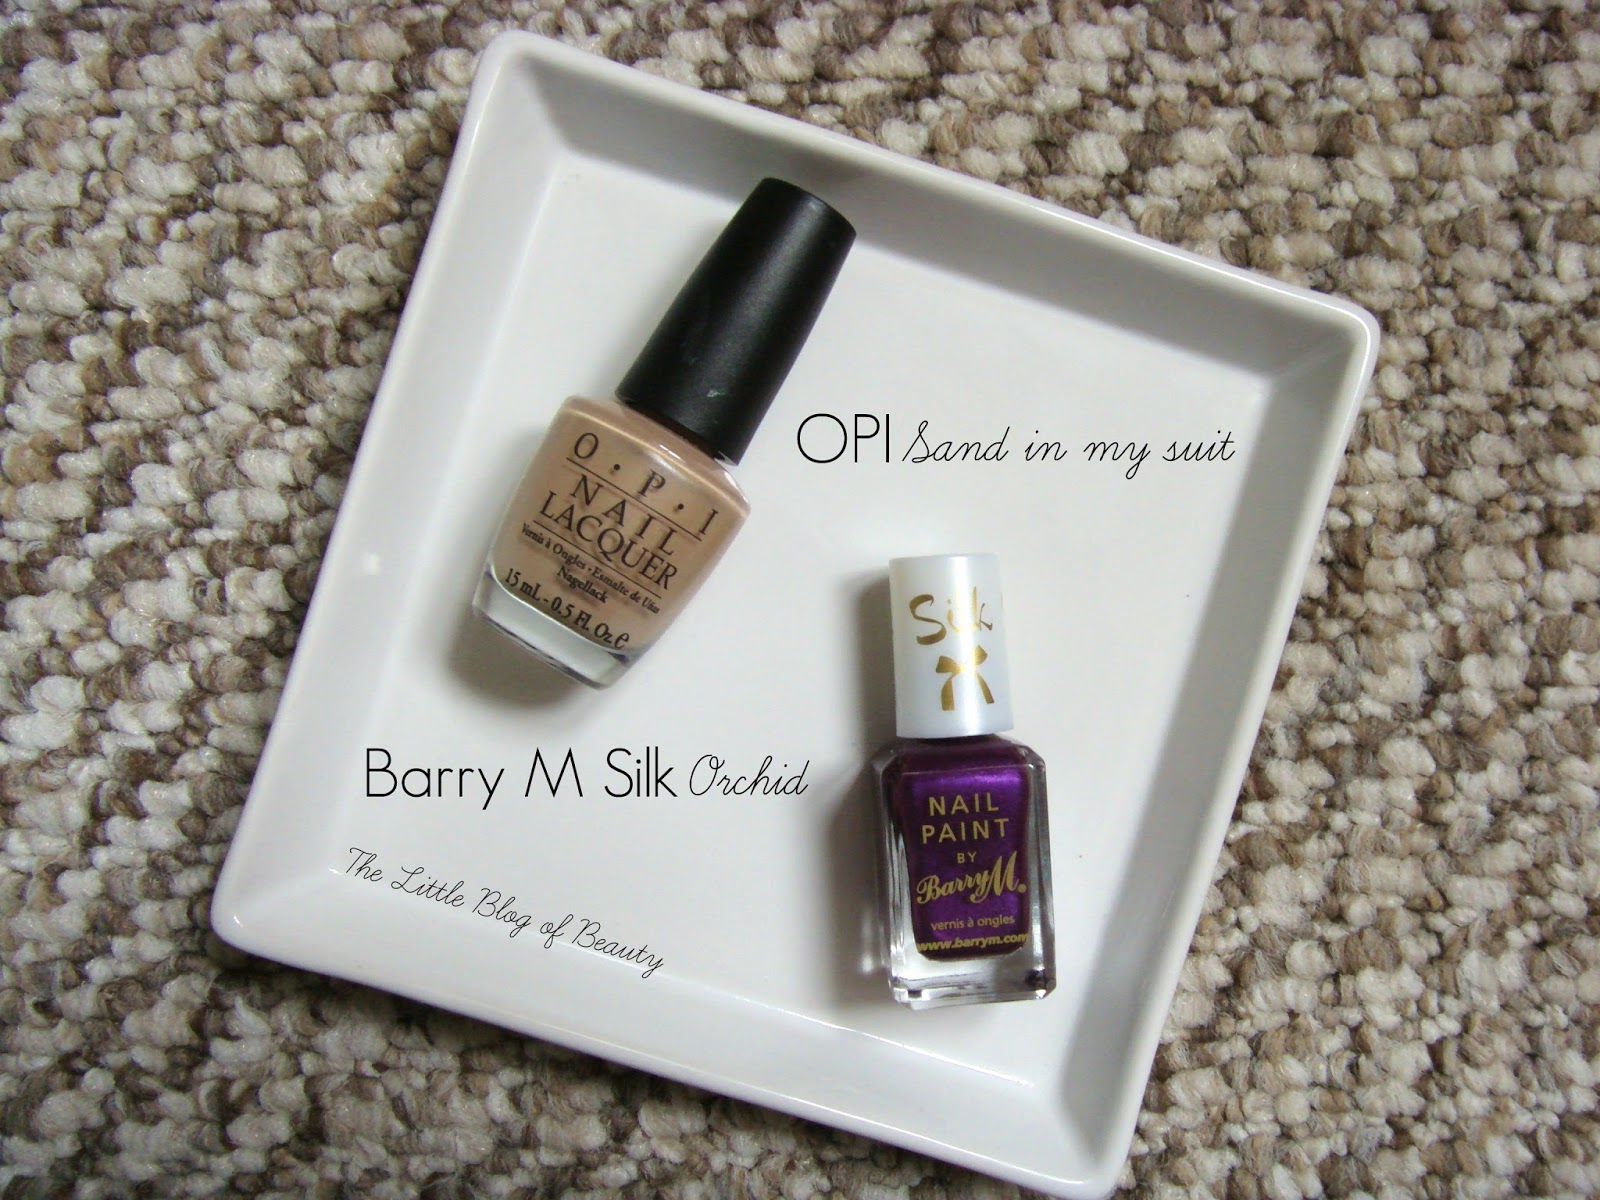 OPI Sand in my suit and Barry M Silk Orchid